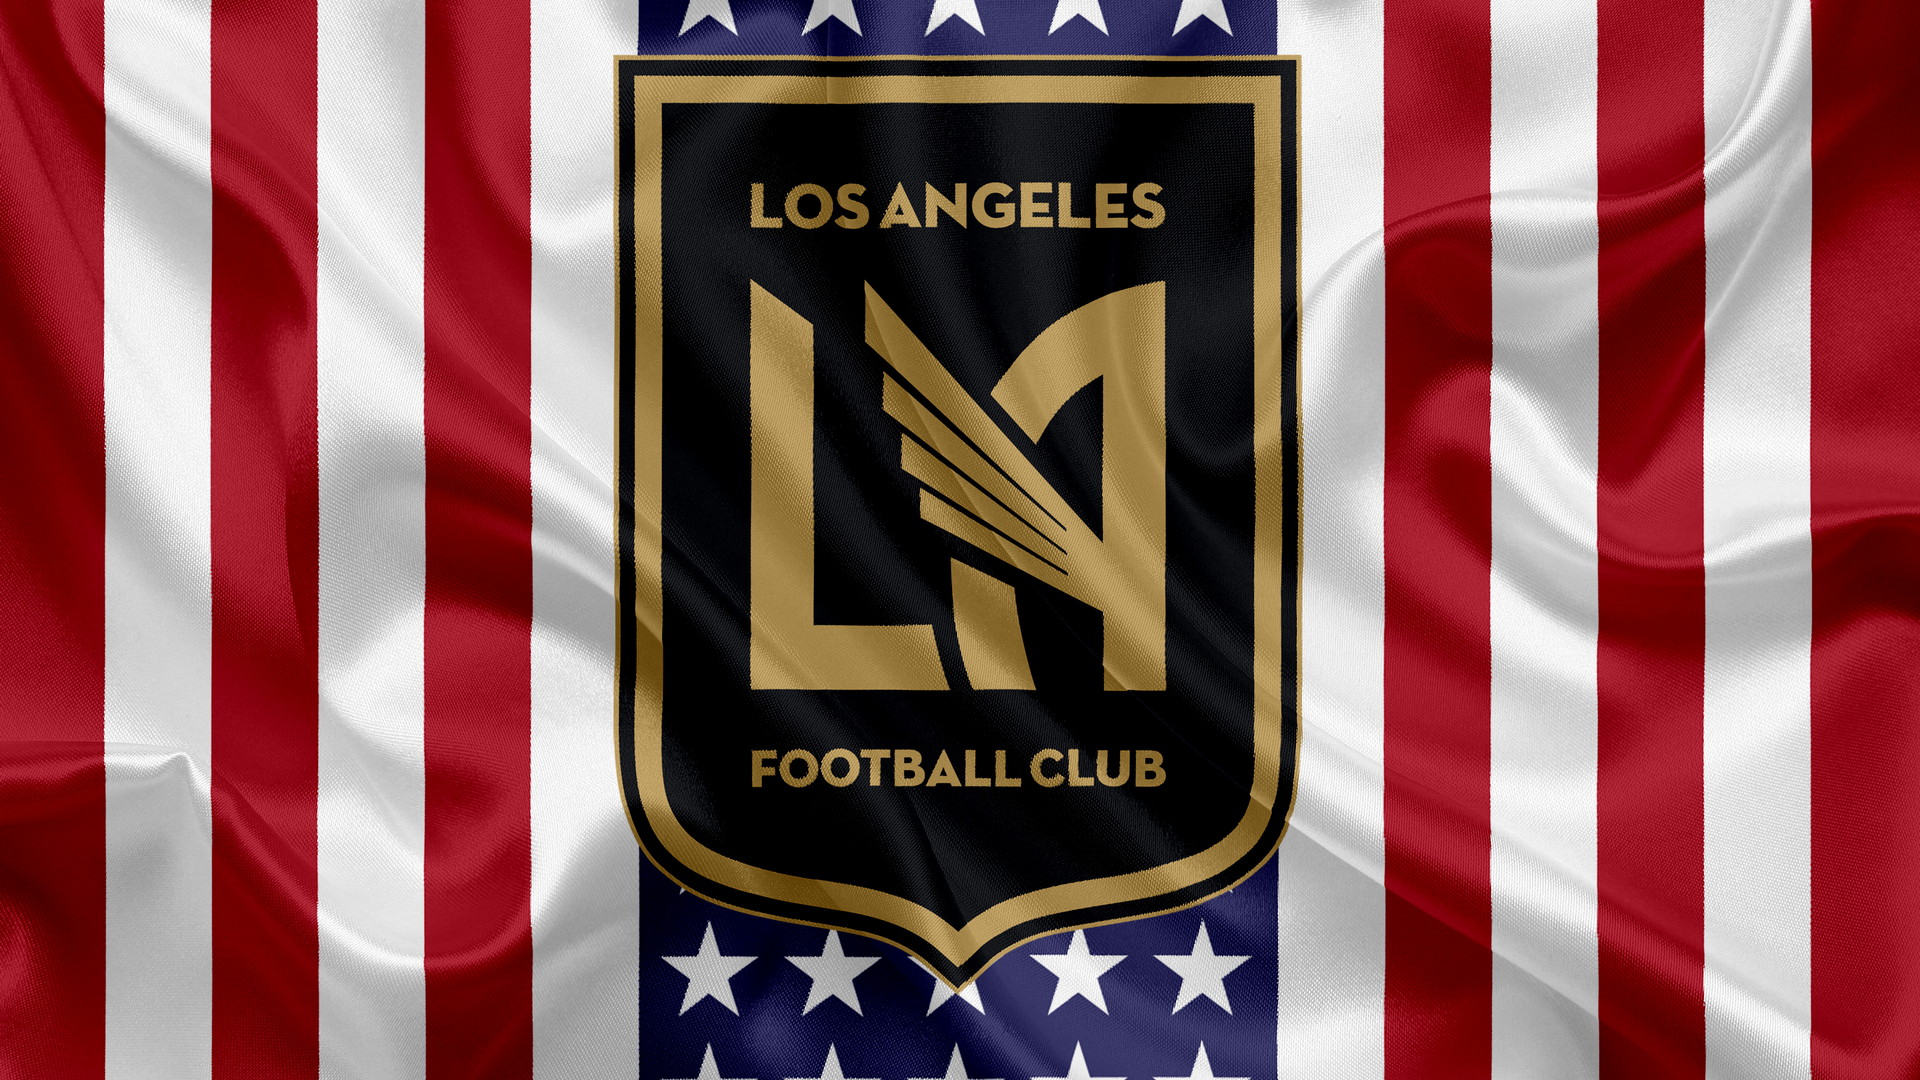 HD Desktop Wallpaper Los Angeles FC with high-resolution 1920x1080 pixel. You can use this wallpaper for your Desktop Computers, Mac Screensavers, Windows Backgrounds, iPhone Wallpapers, Tablet or Android Lock screen and another Mobile device